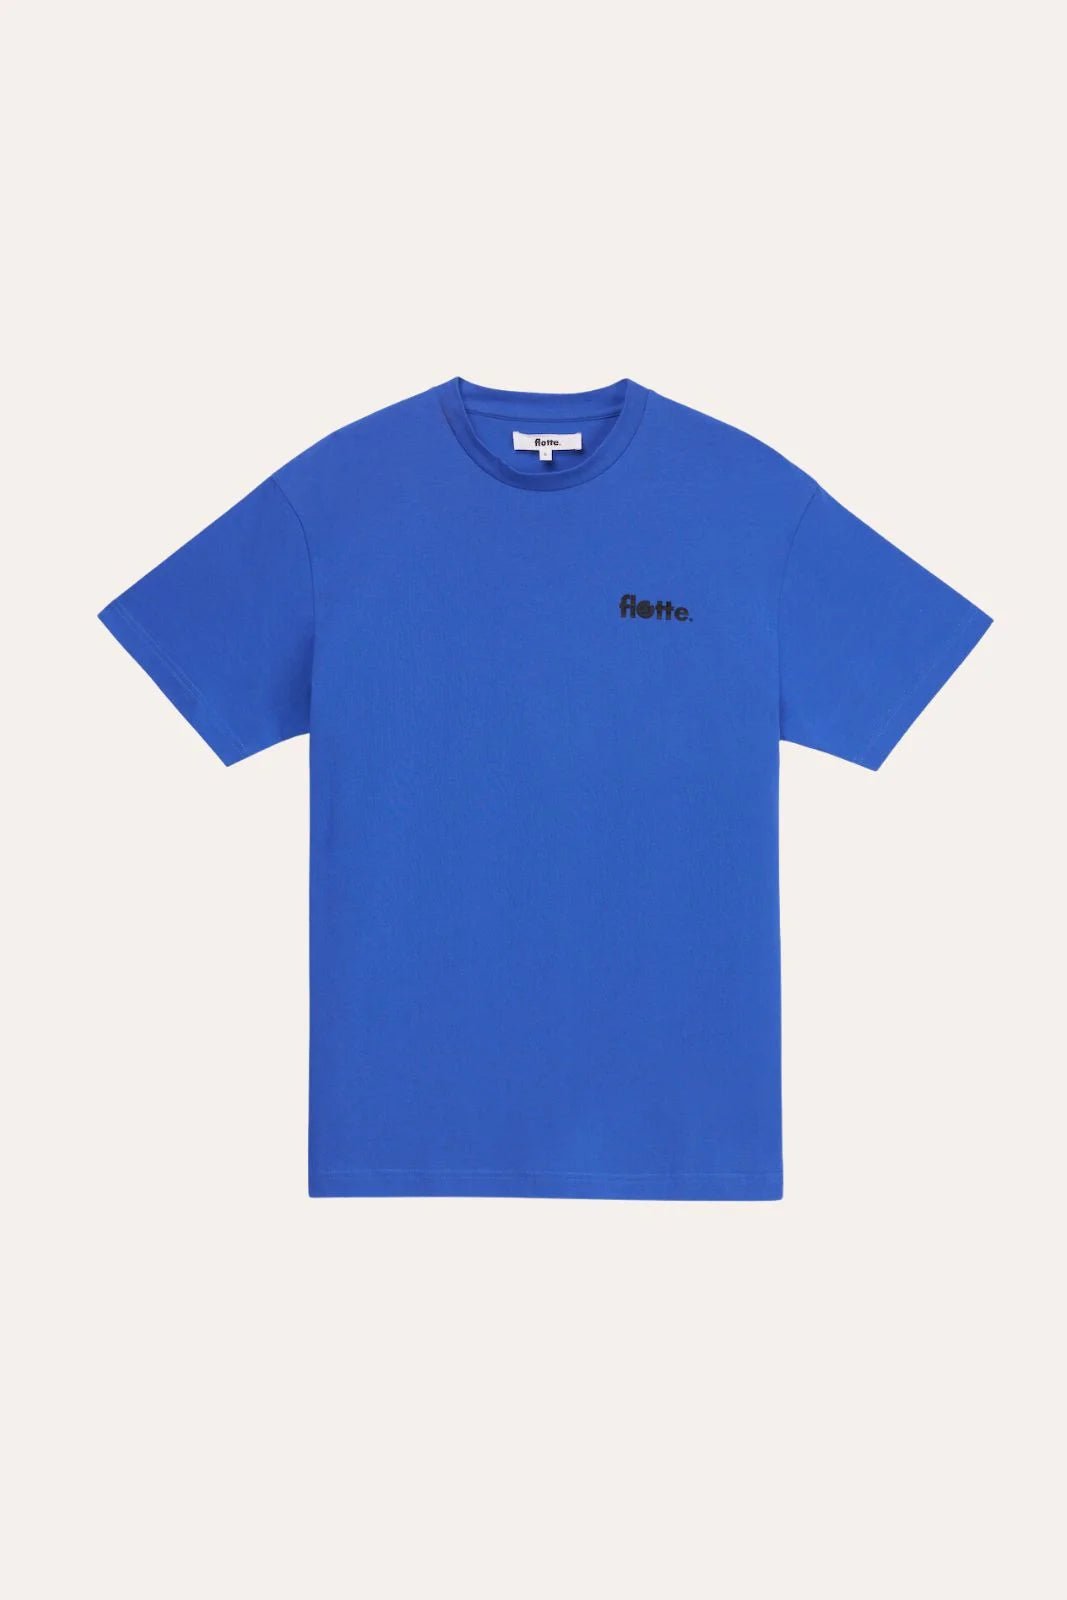 Temple water-repellent T-shirt in 100% cotton, made in Portugal #couleur_bleu-roi